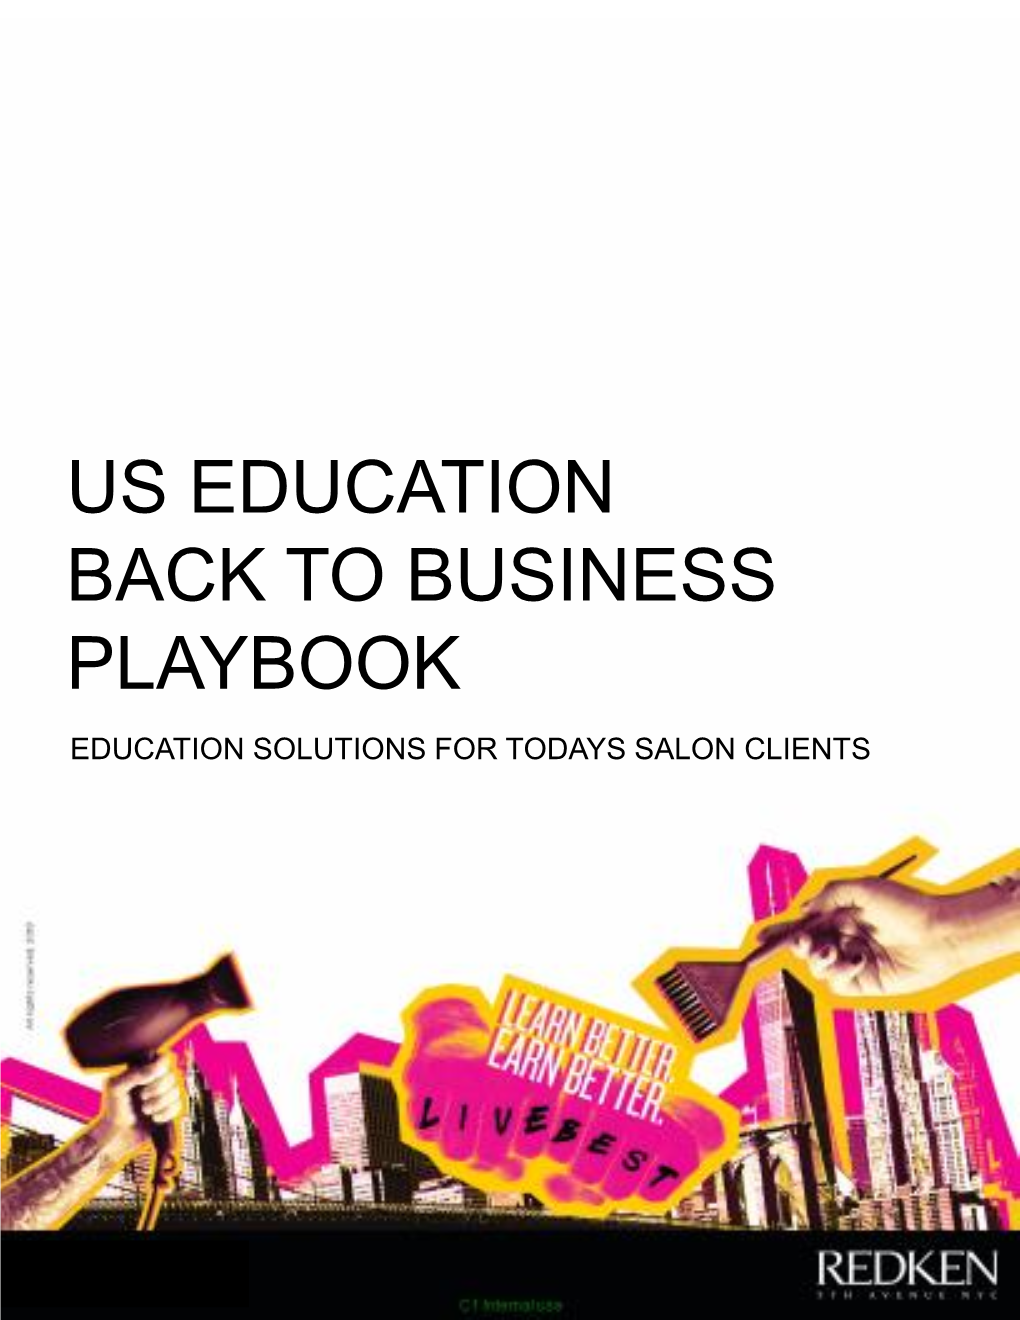 Us Education Back to Business Playbook